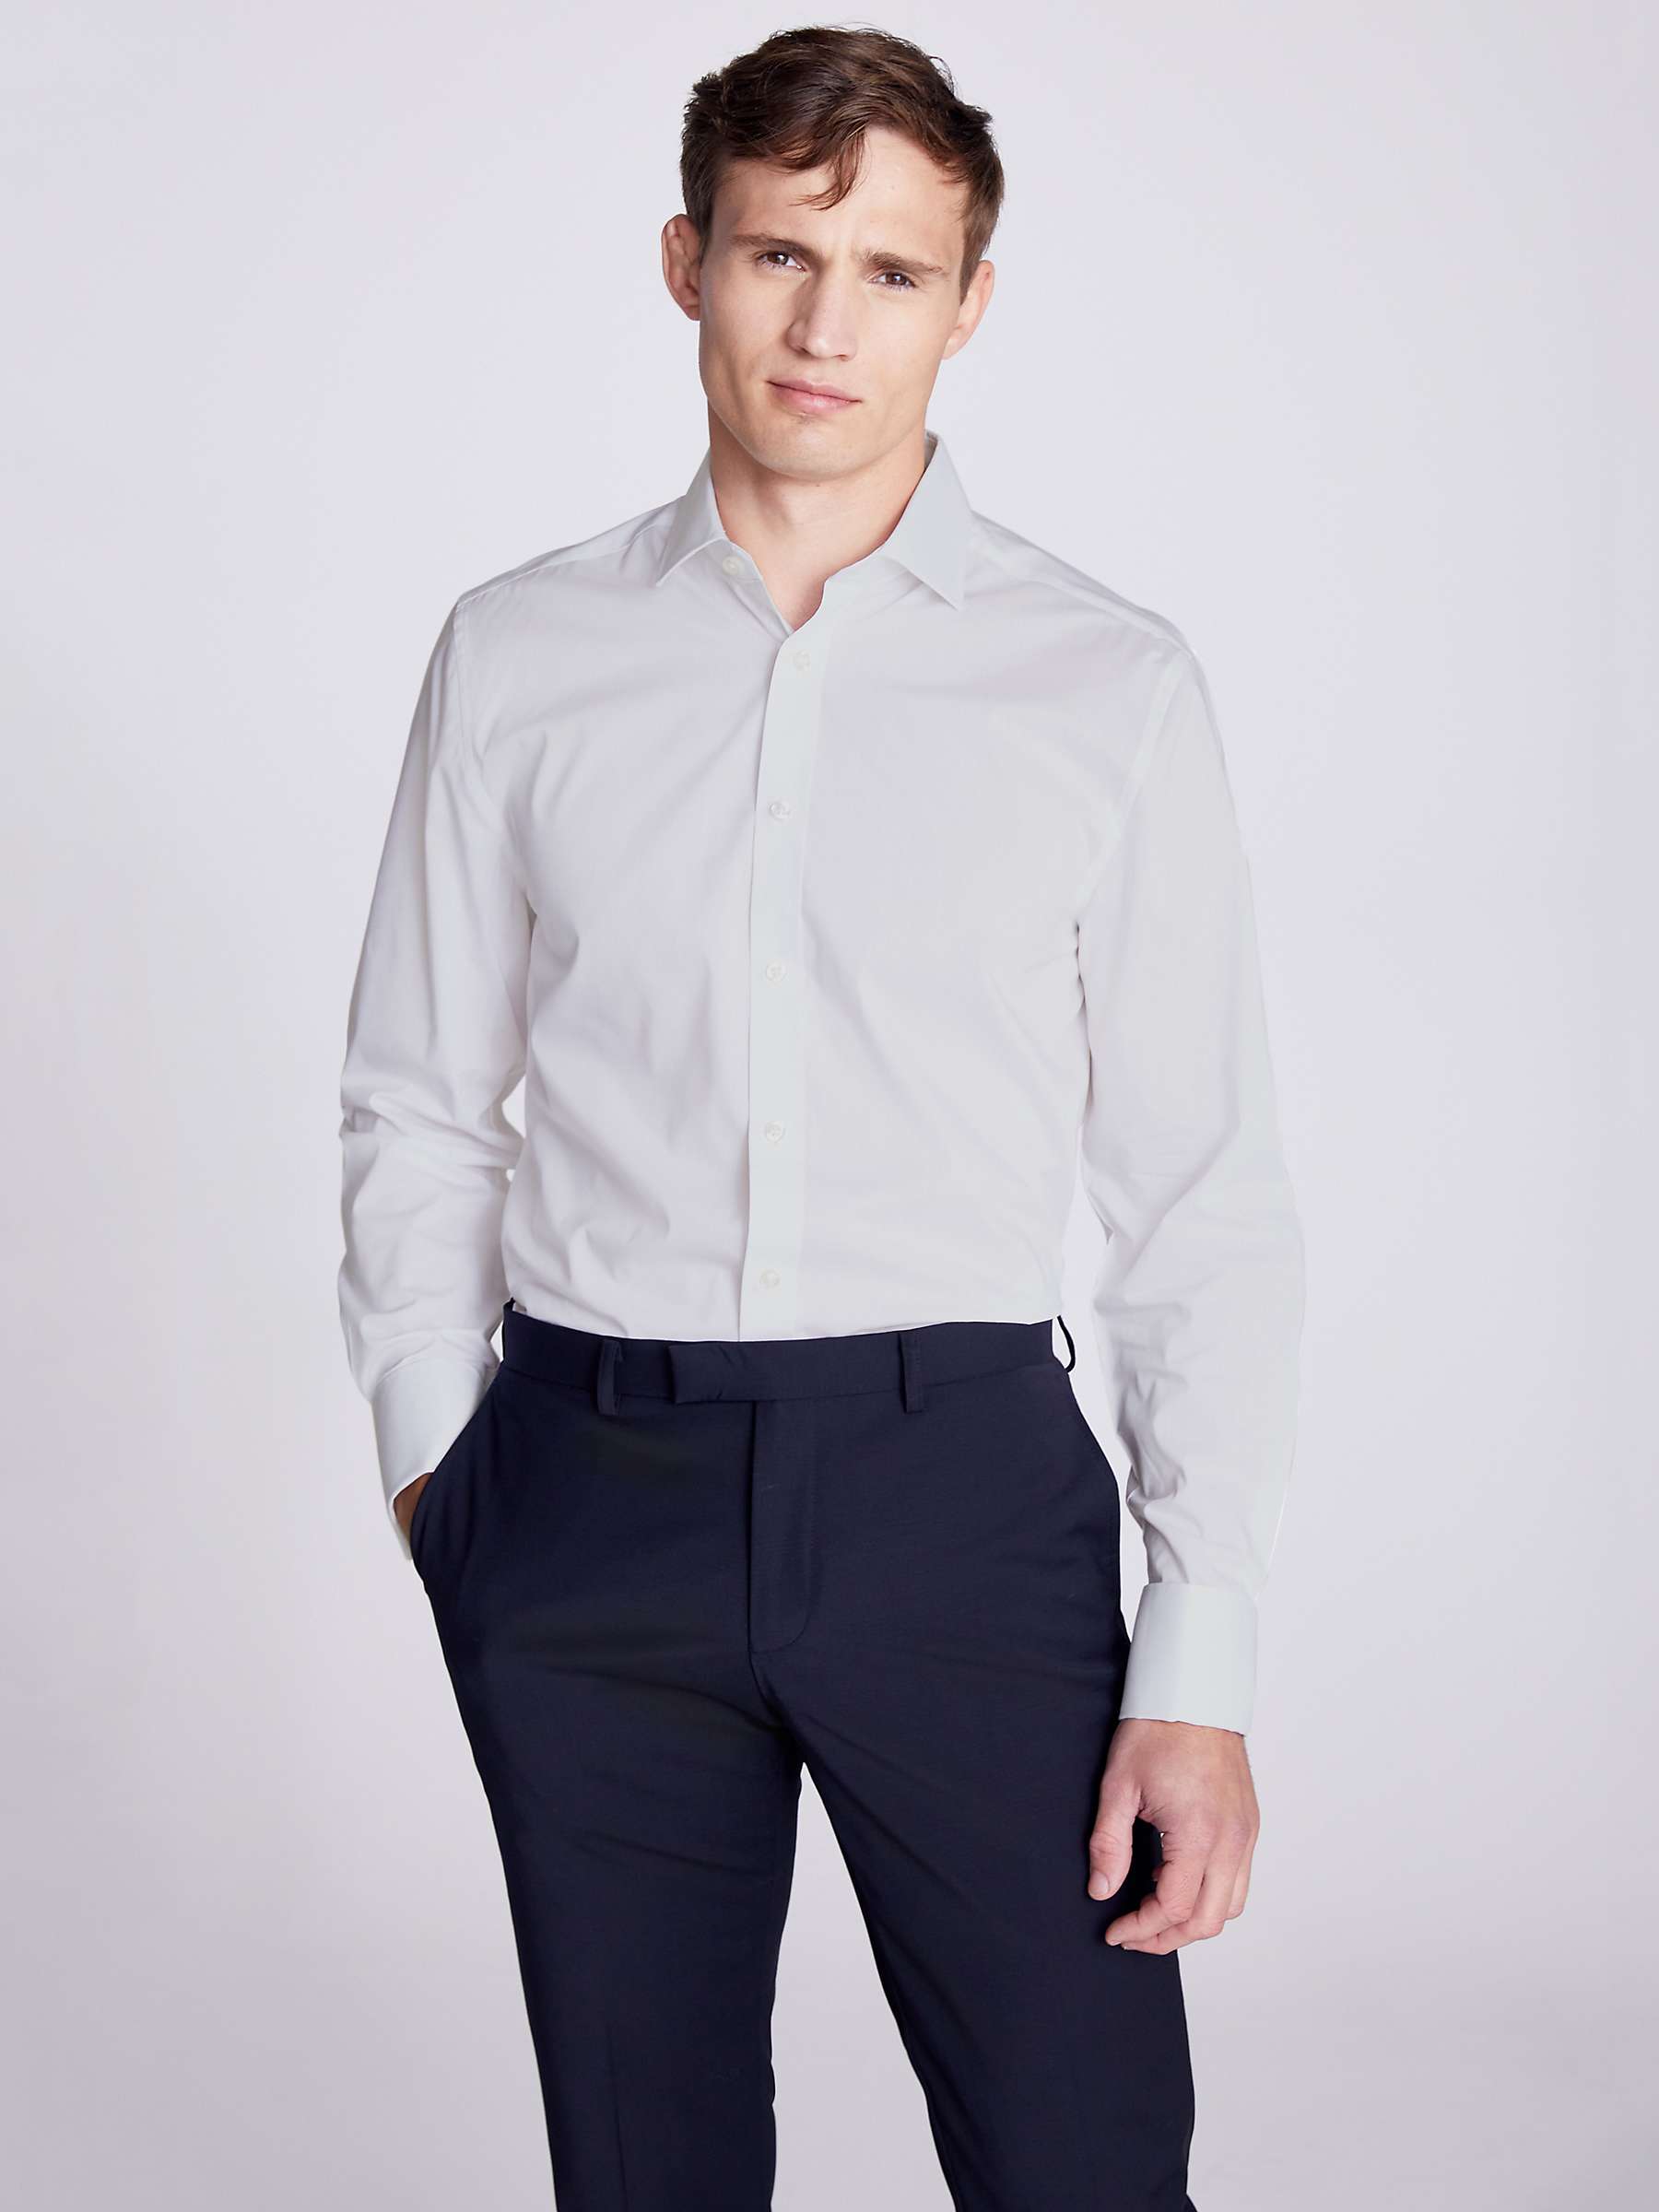 Buy Moss Regular Fit Double-Cuff White Stretch Shirt, White Online at johnlewis.com